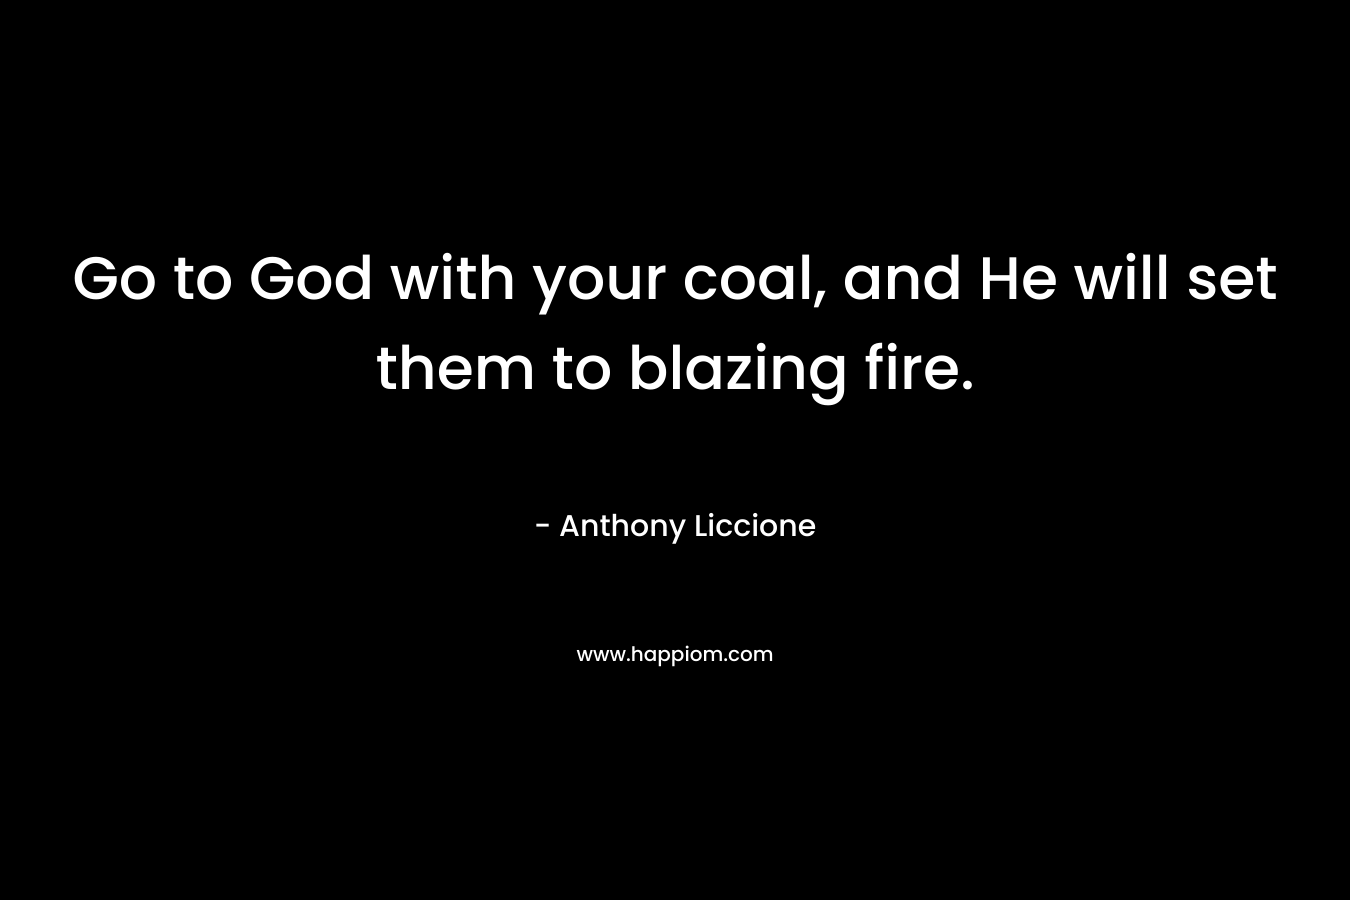 Go to God with your coal, and He will set them to blazing fire.